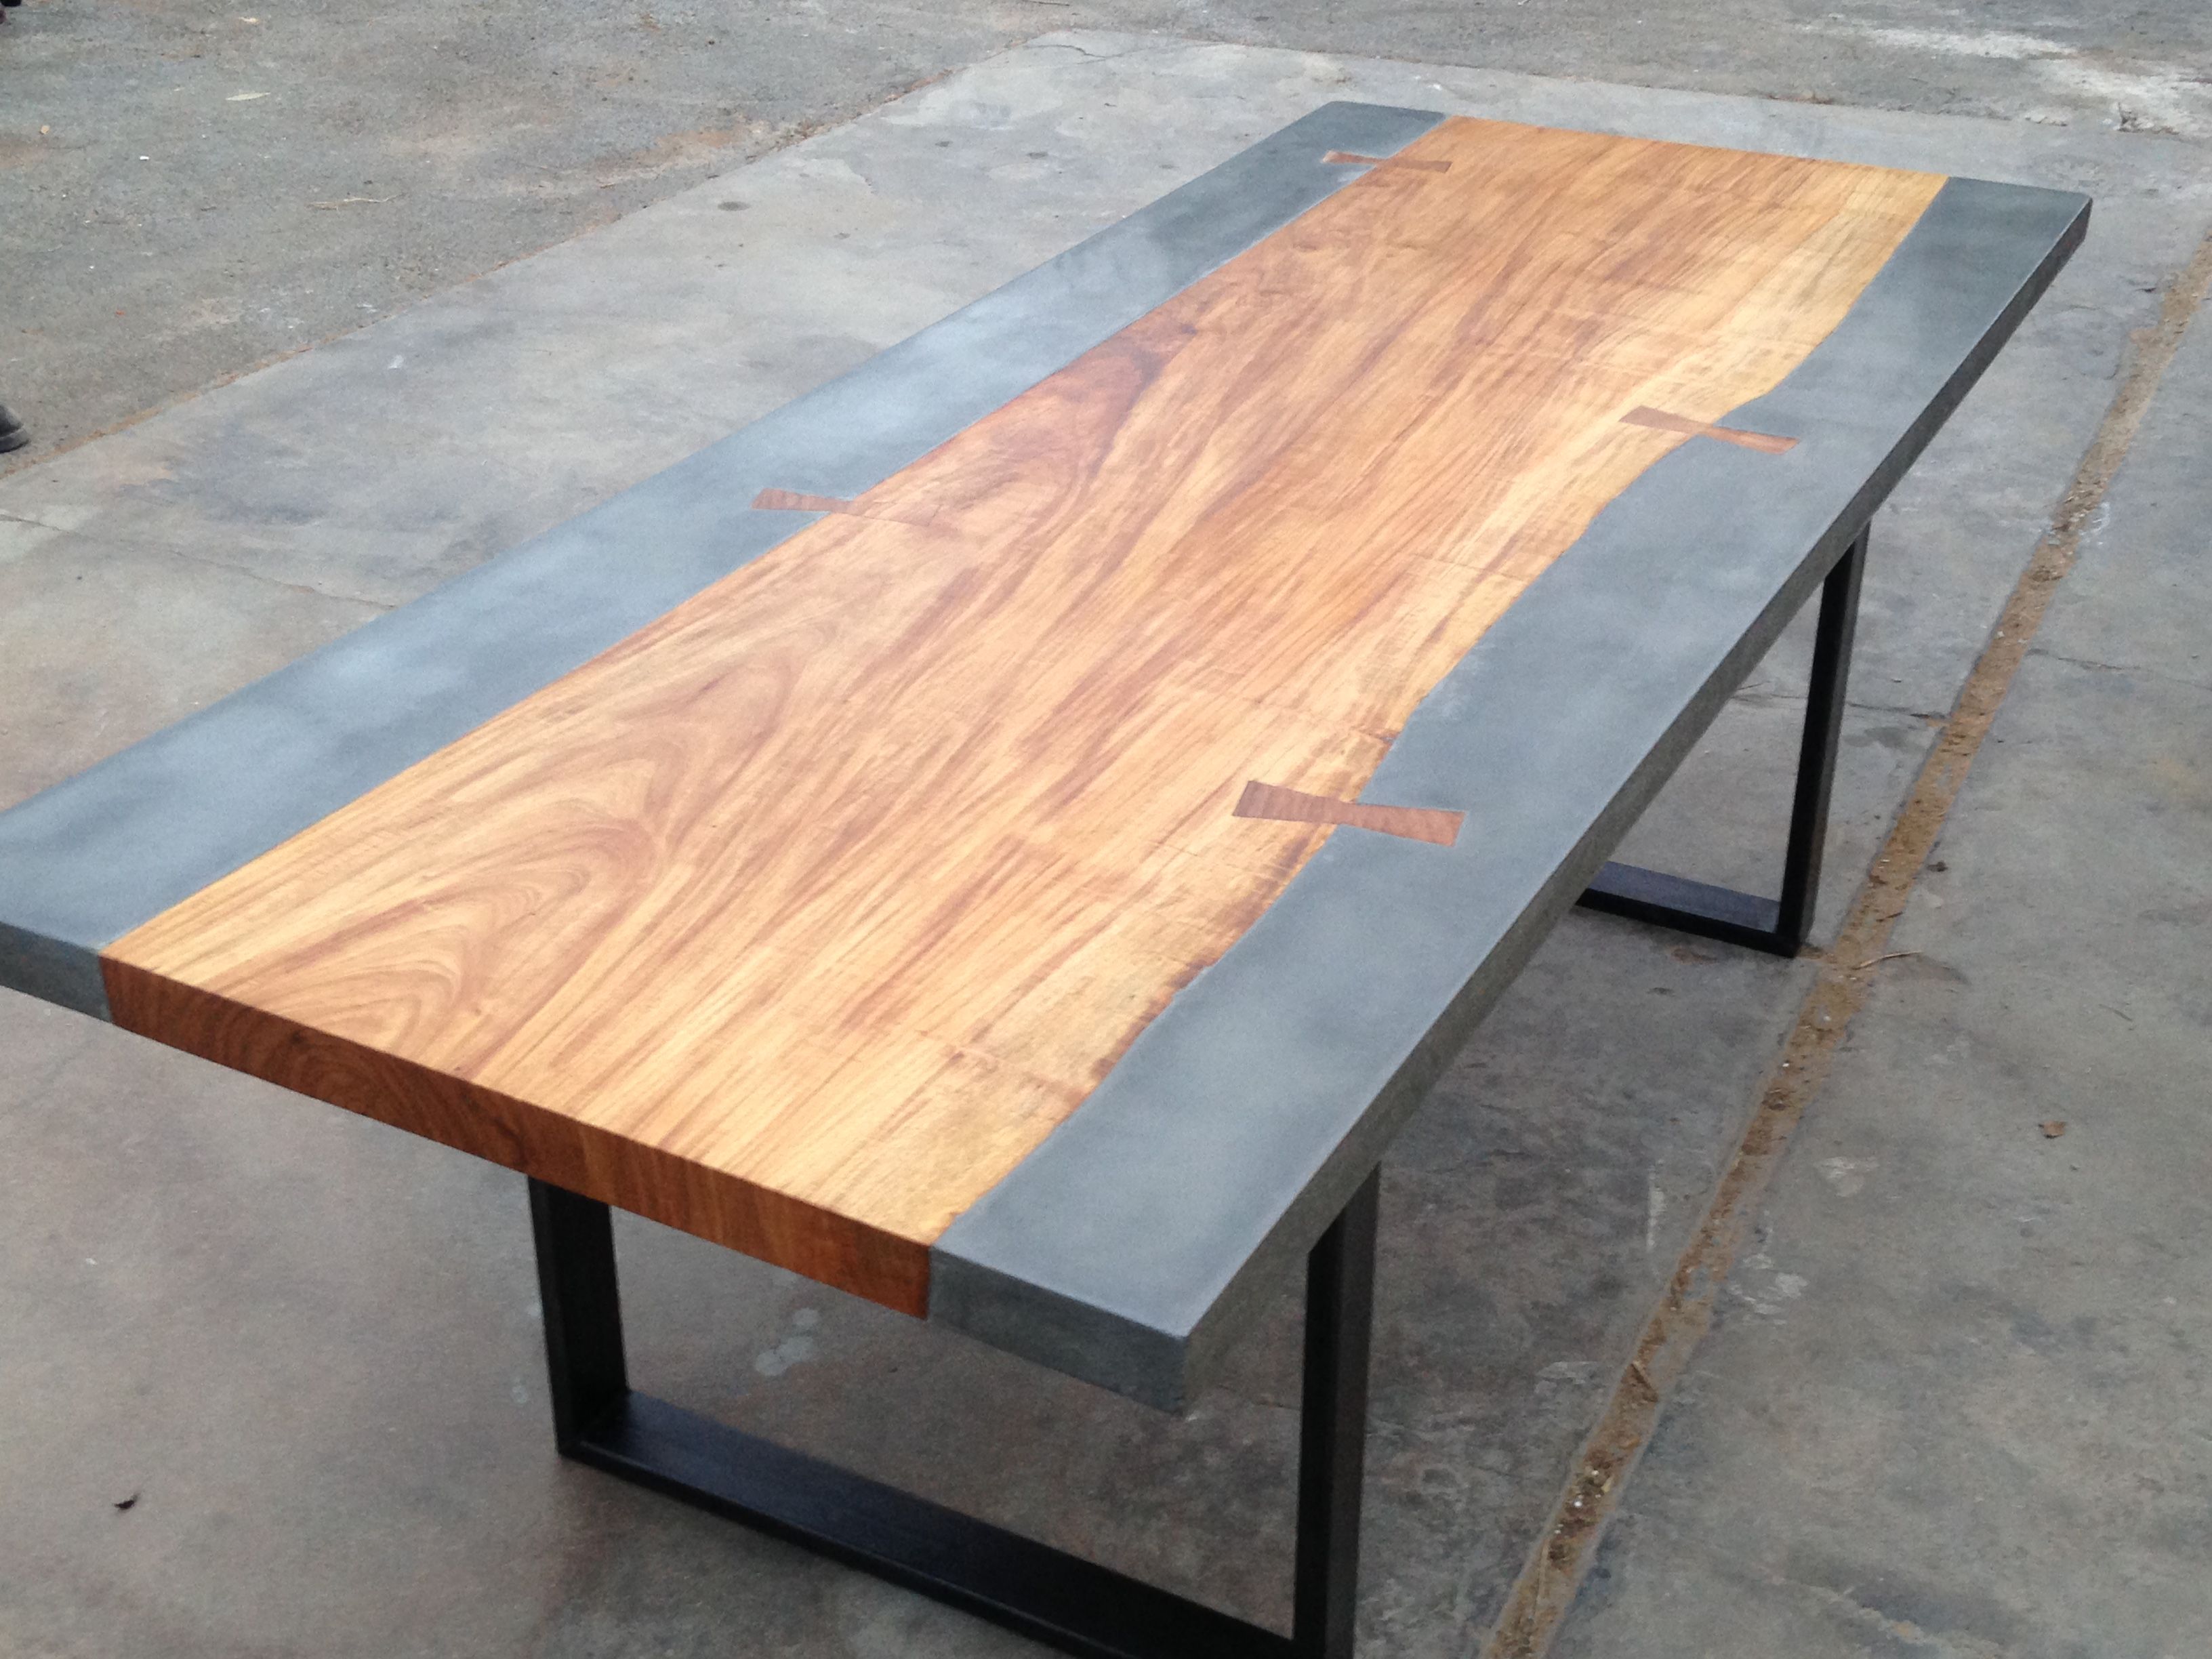 concrete and wood kitchen table